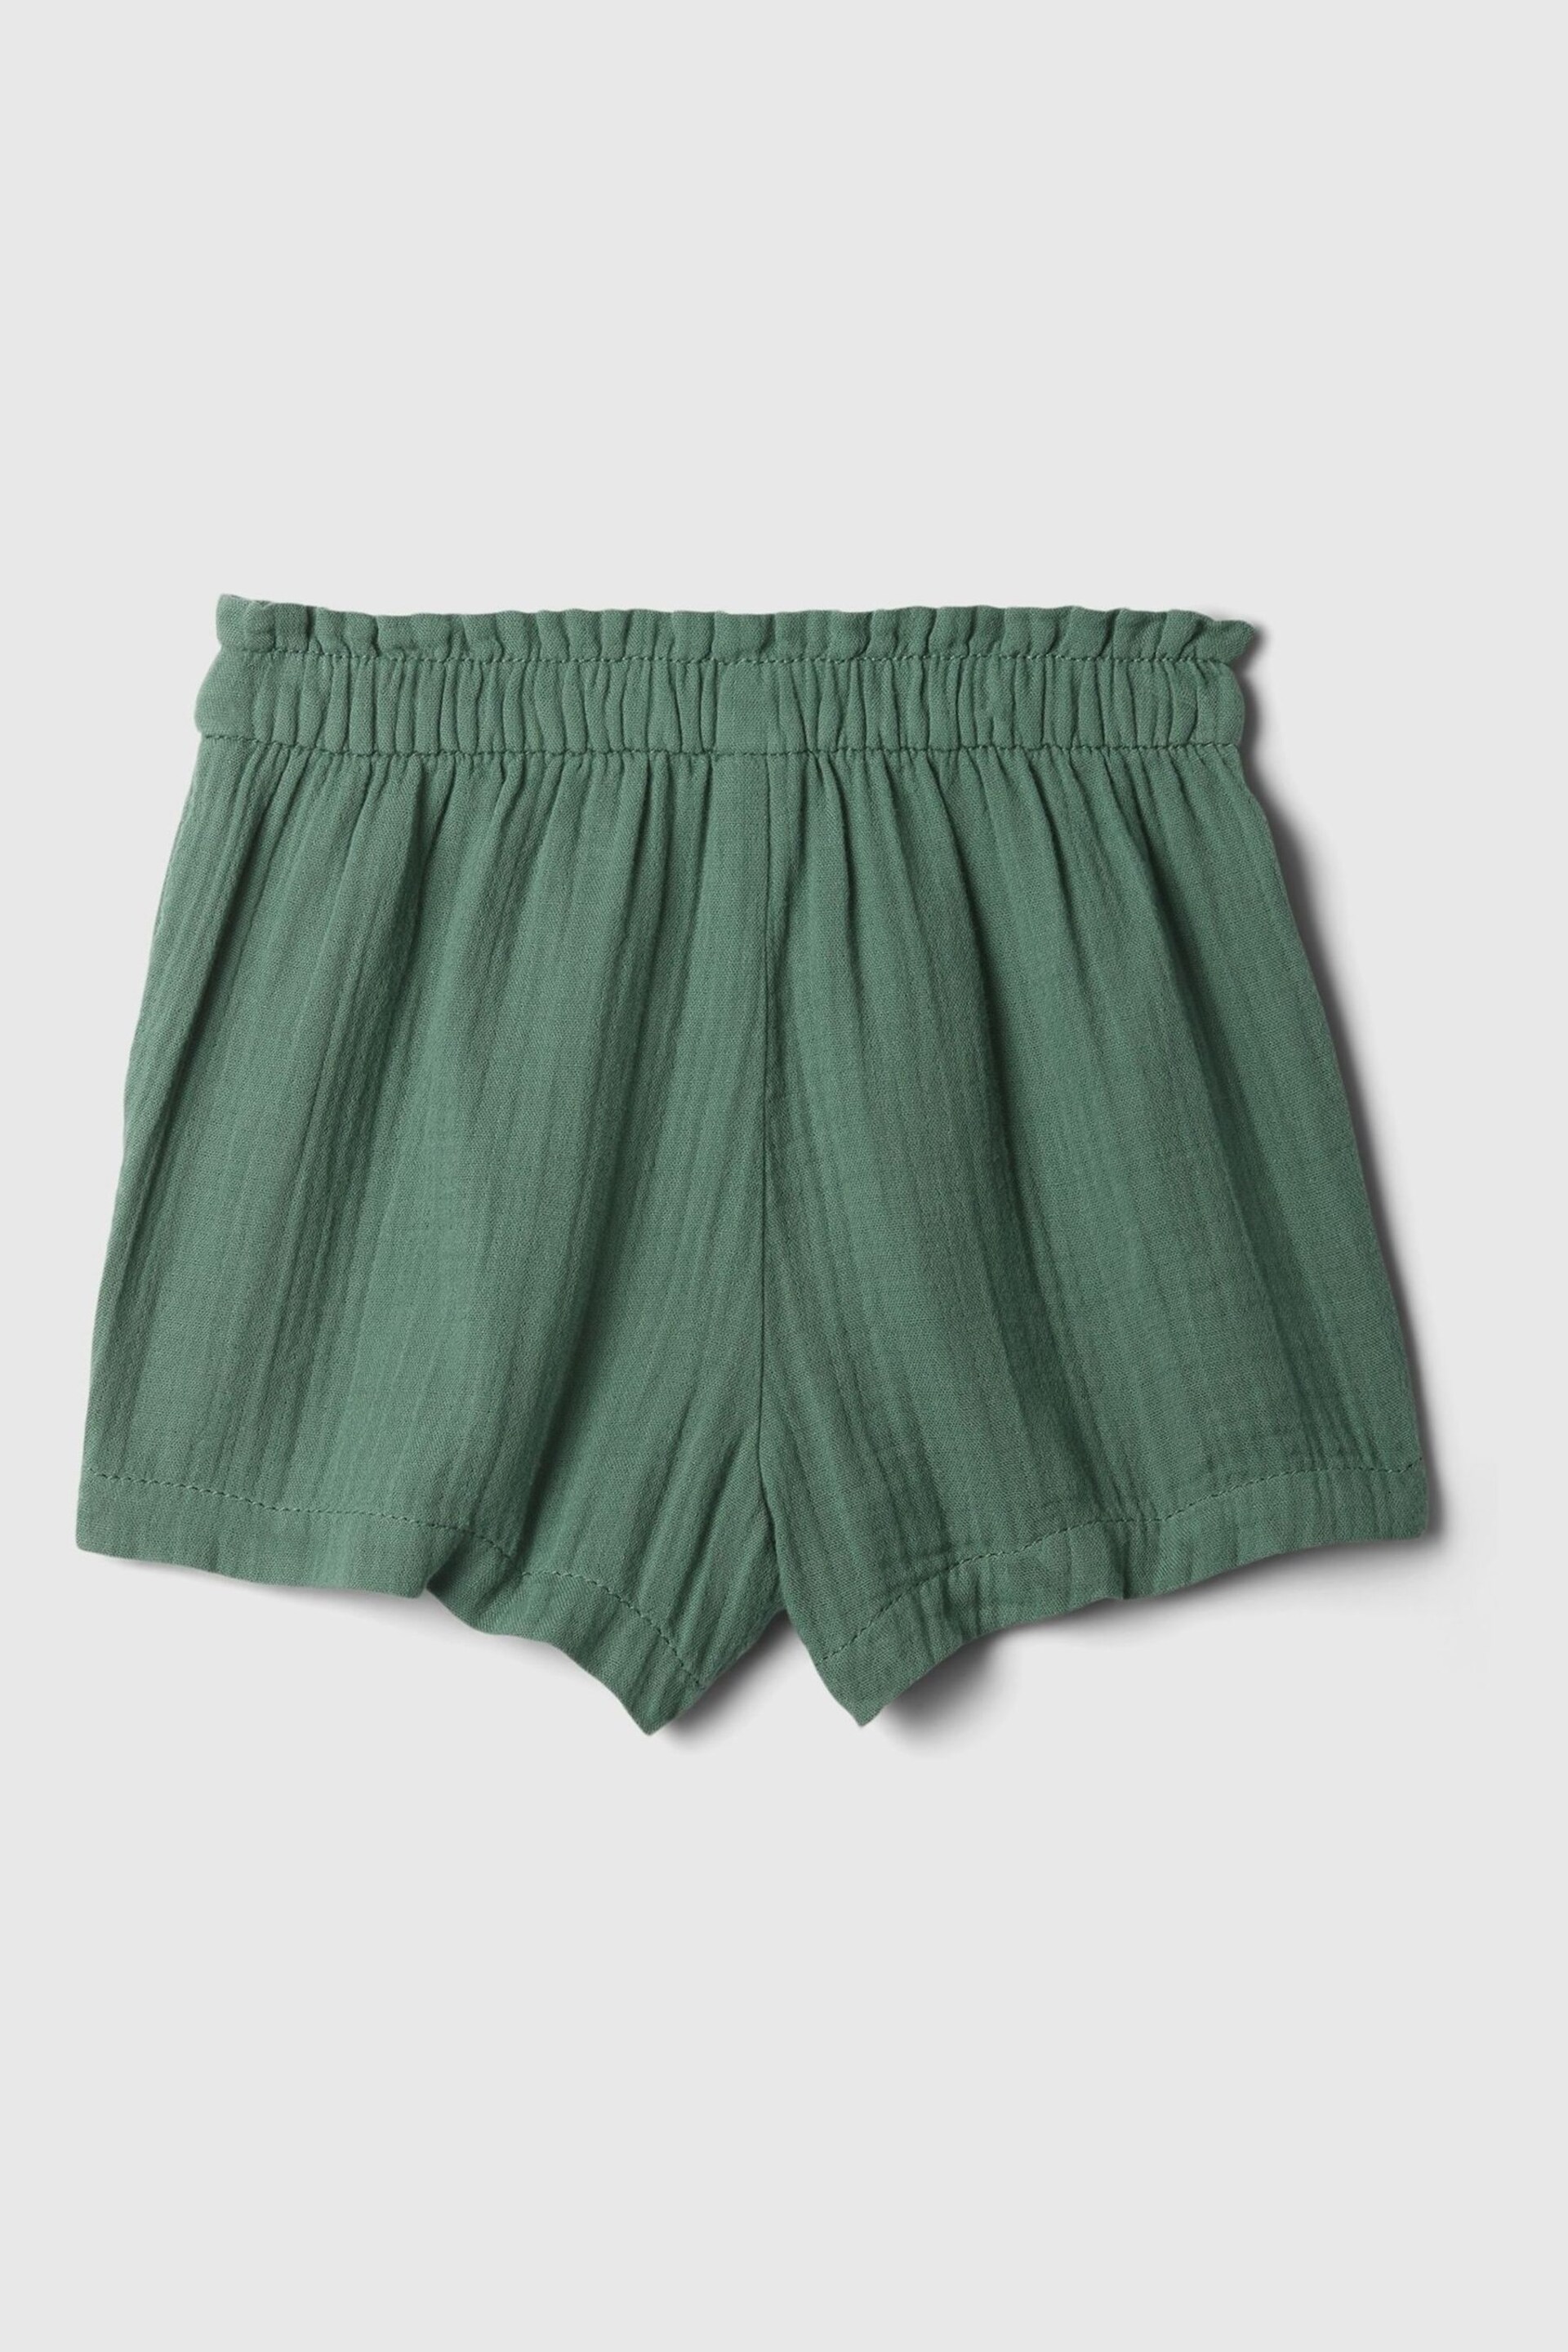 Gap Green Crinkle Cotton Pull On Baby Shorts (12mths-5yrs) - Image 2 of 2